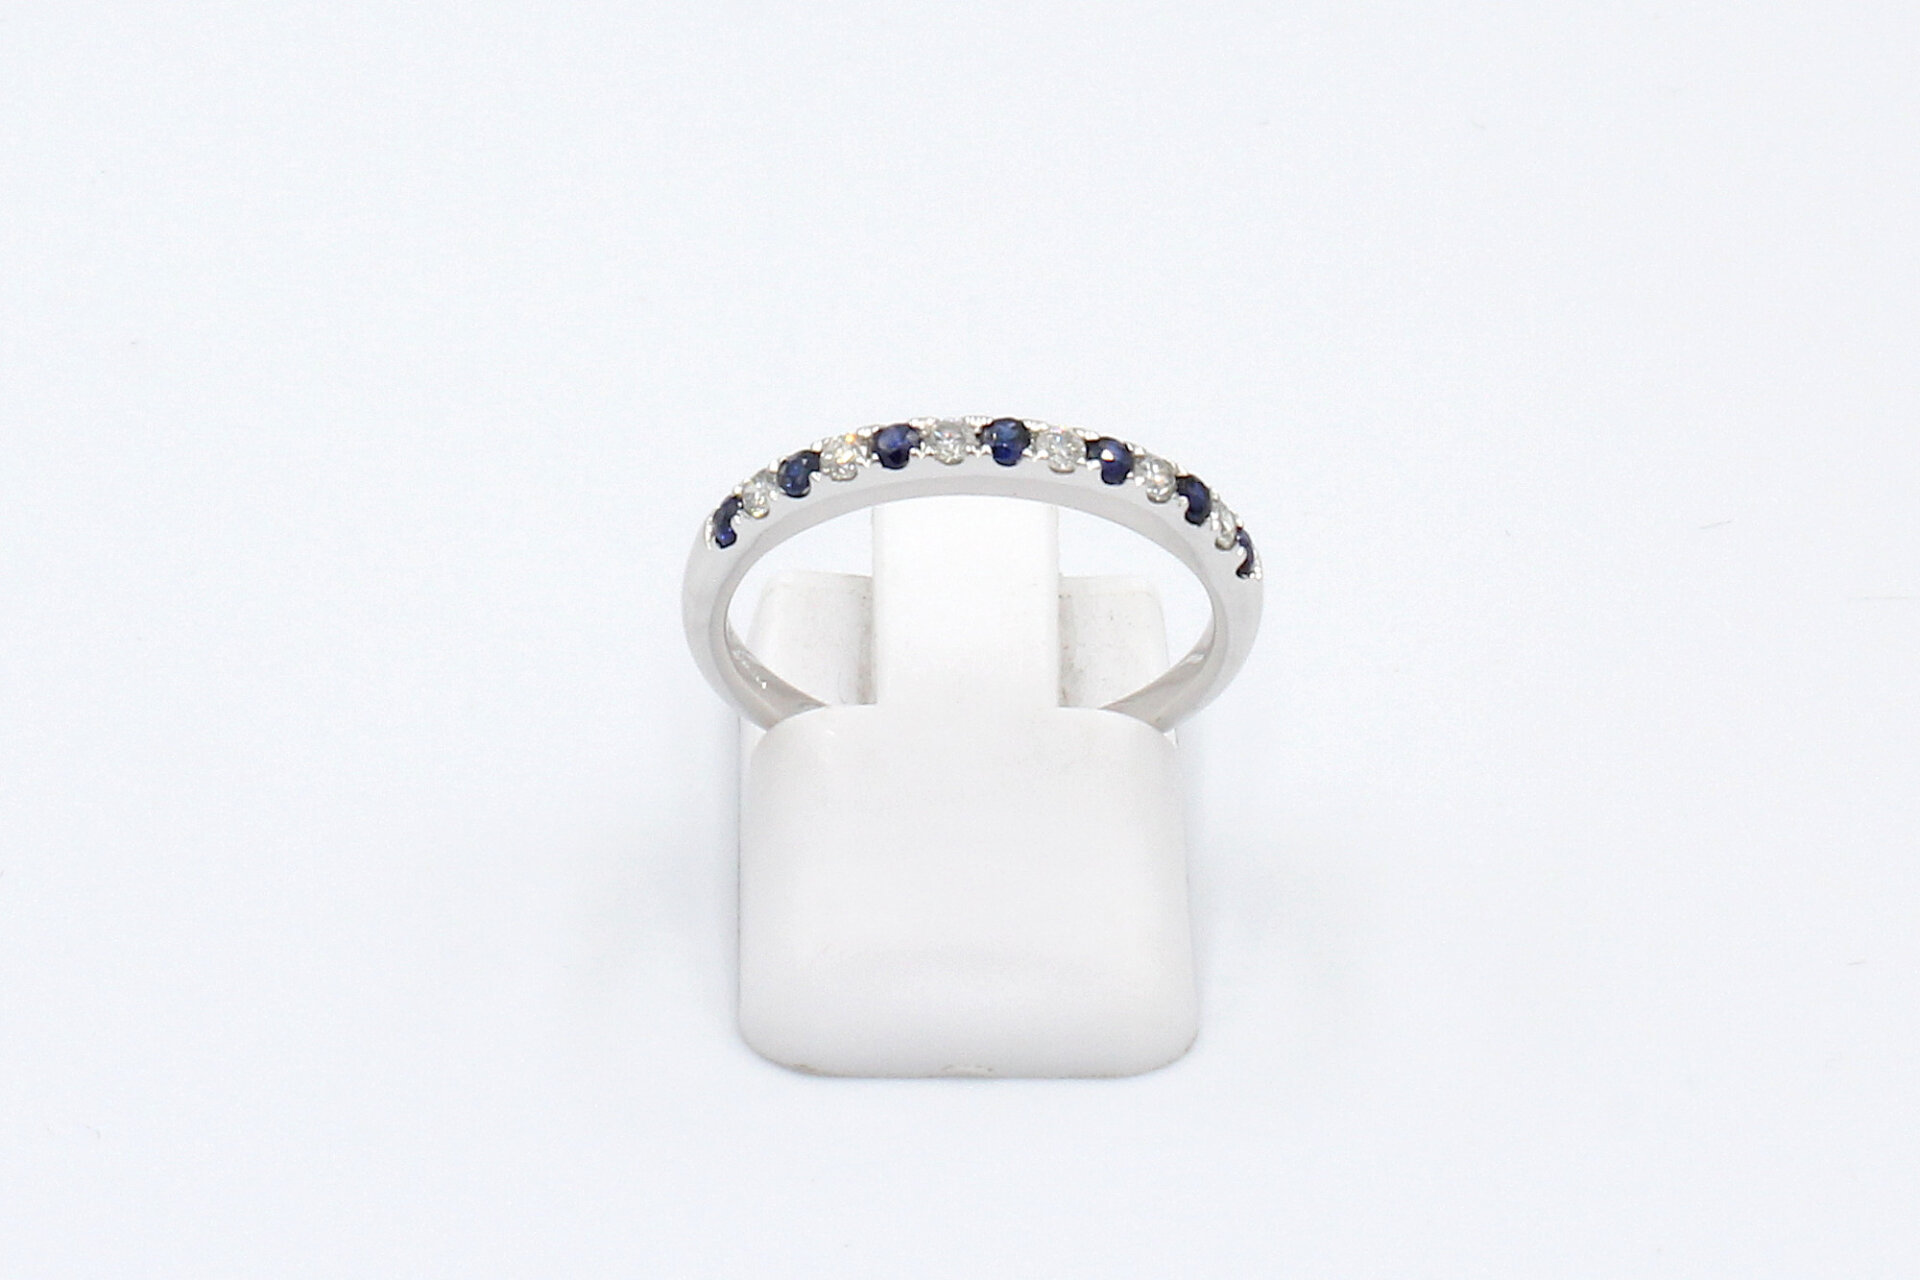 top view of a sapphire and diamond eternity ring